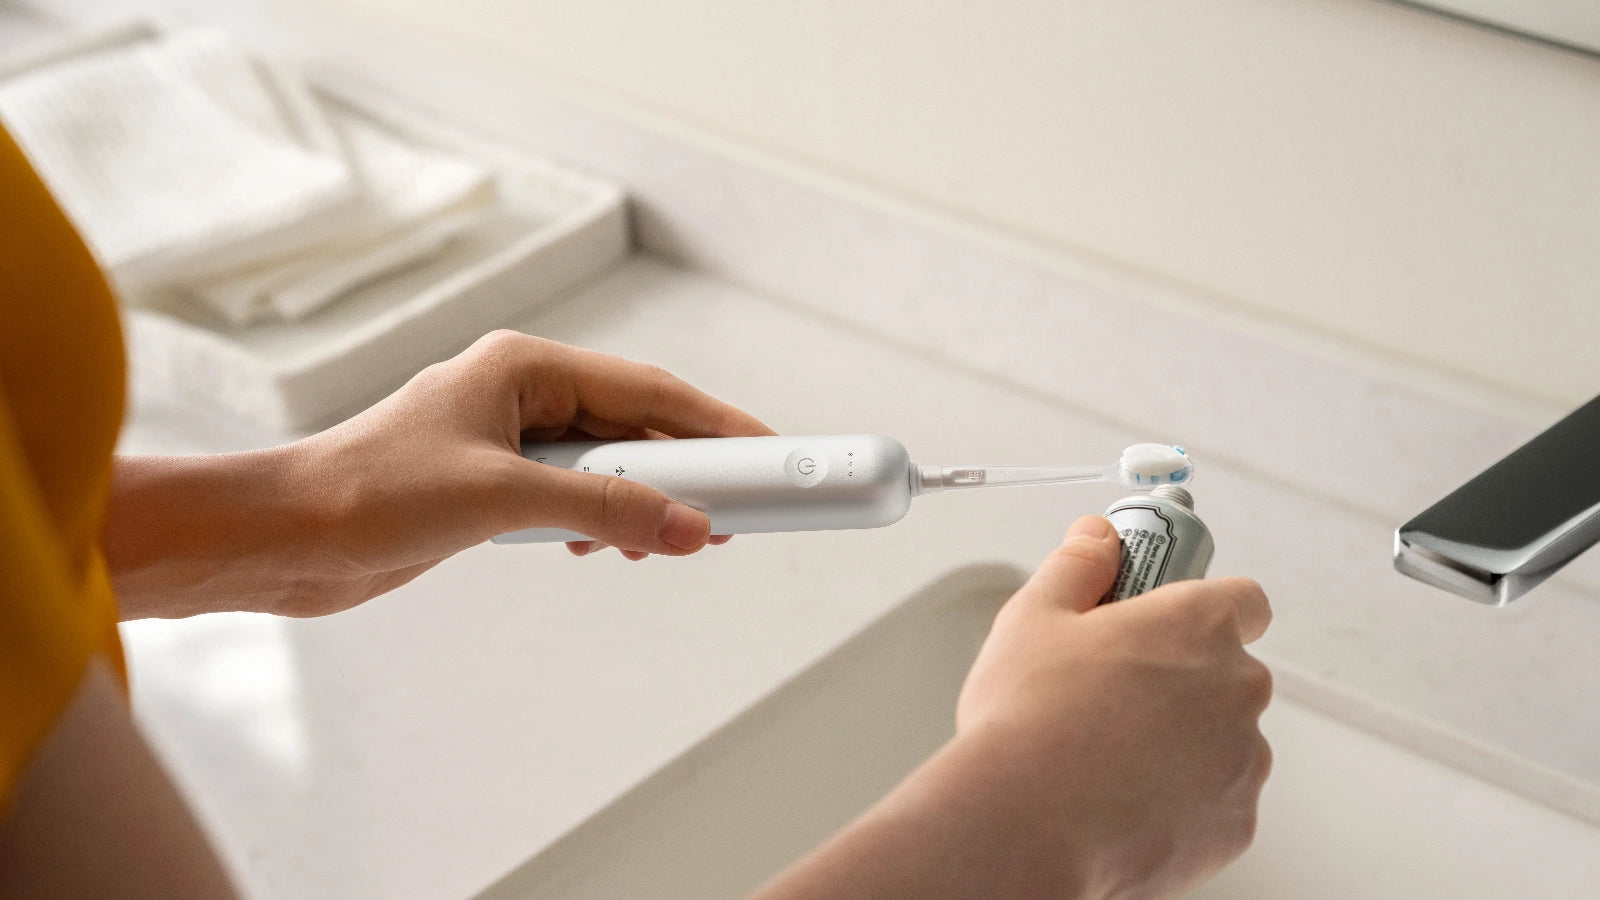 How do we define a good toothbrush?